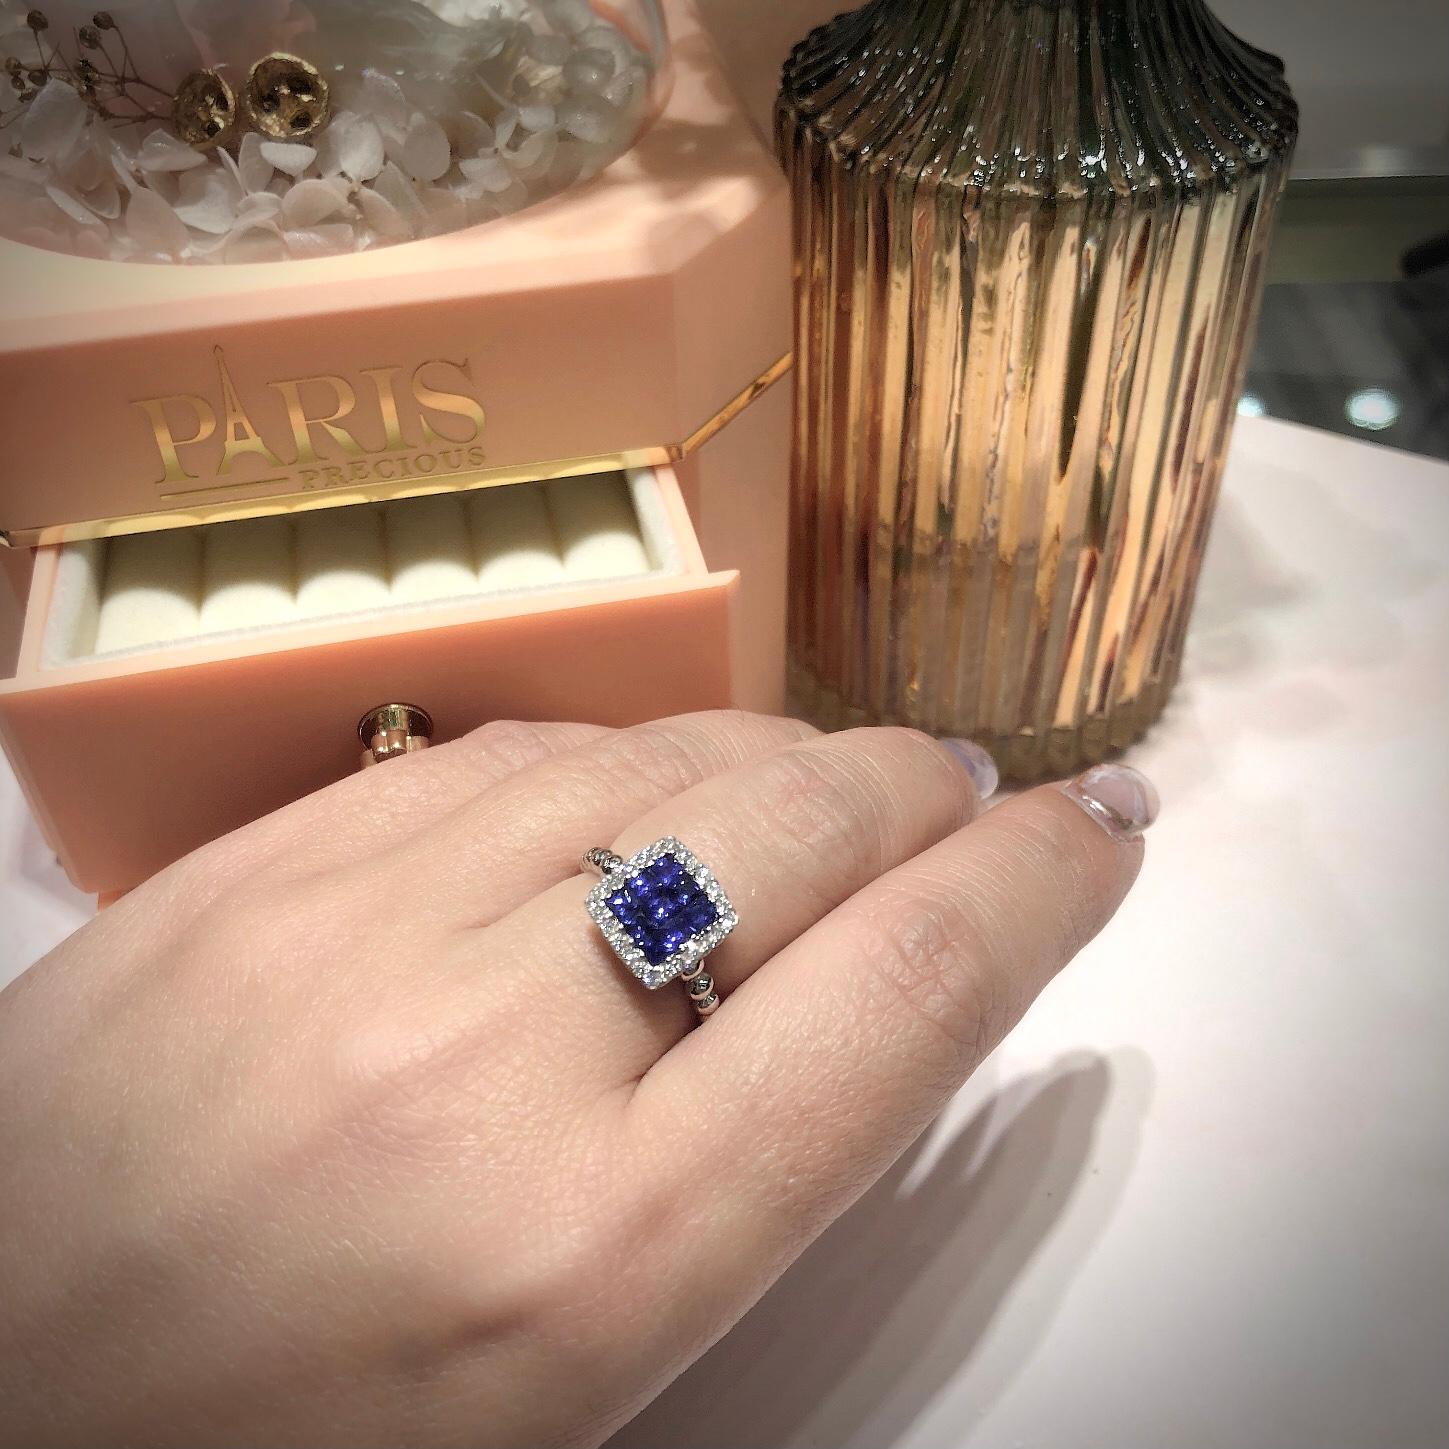 Paris Craft House Sapphire Diamond Cluster Ring in 18 Karat White Gold For Sale 1